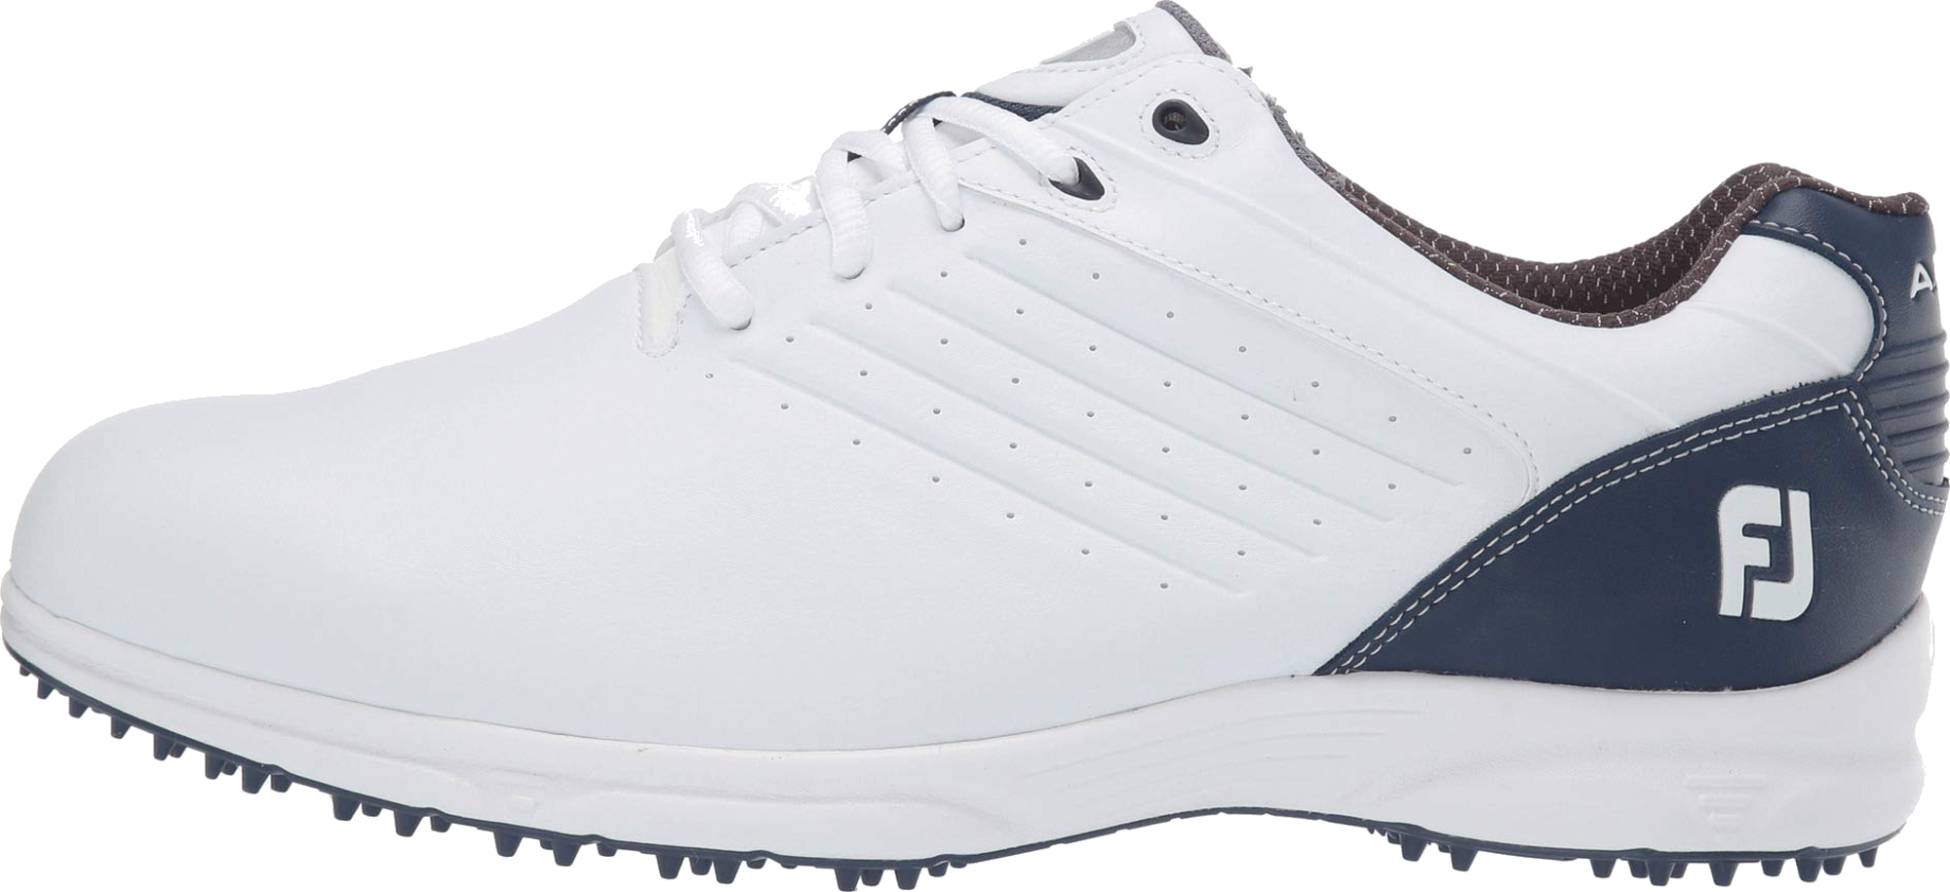 Save 36% on Footjoy Golf Shoes (16 